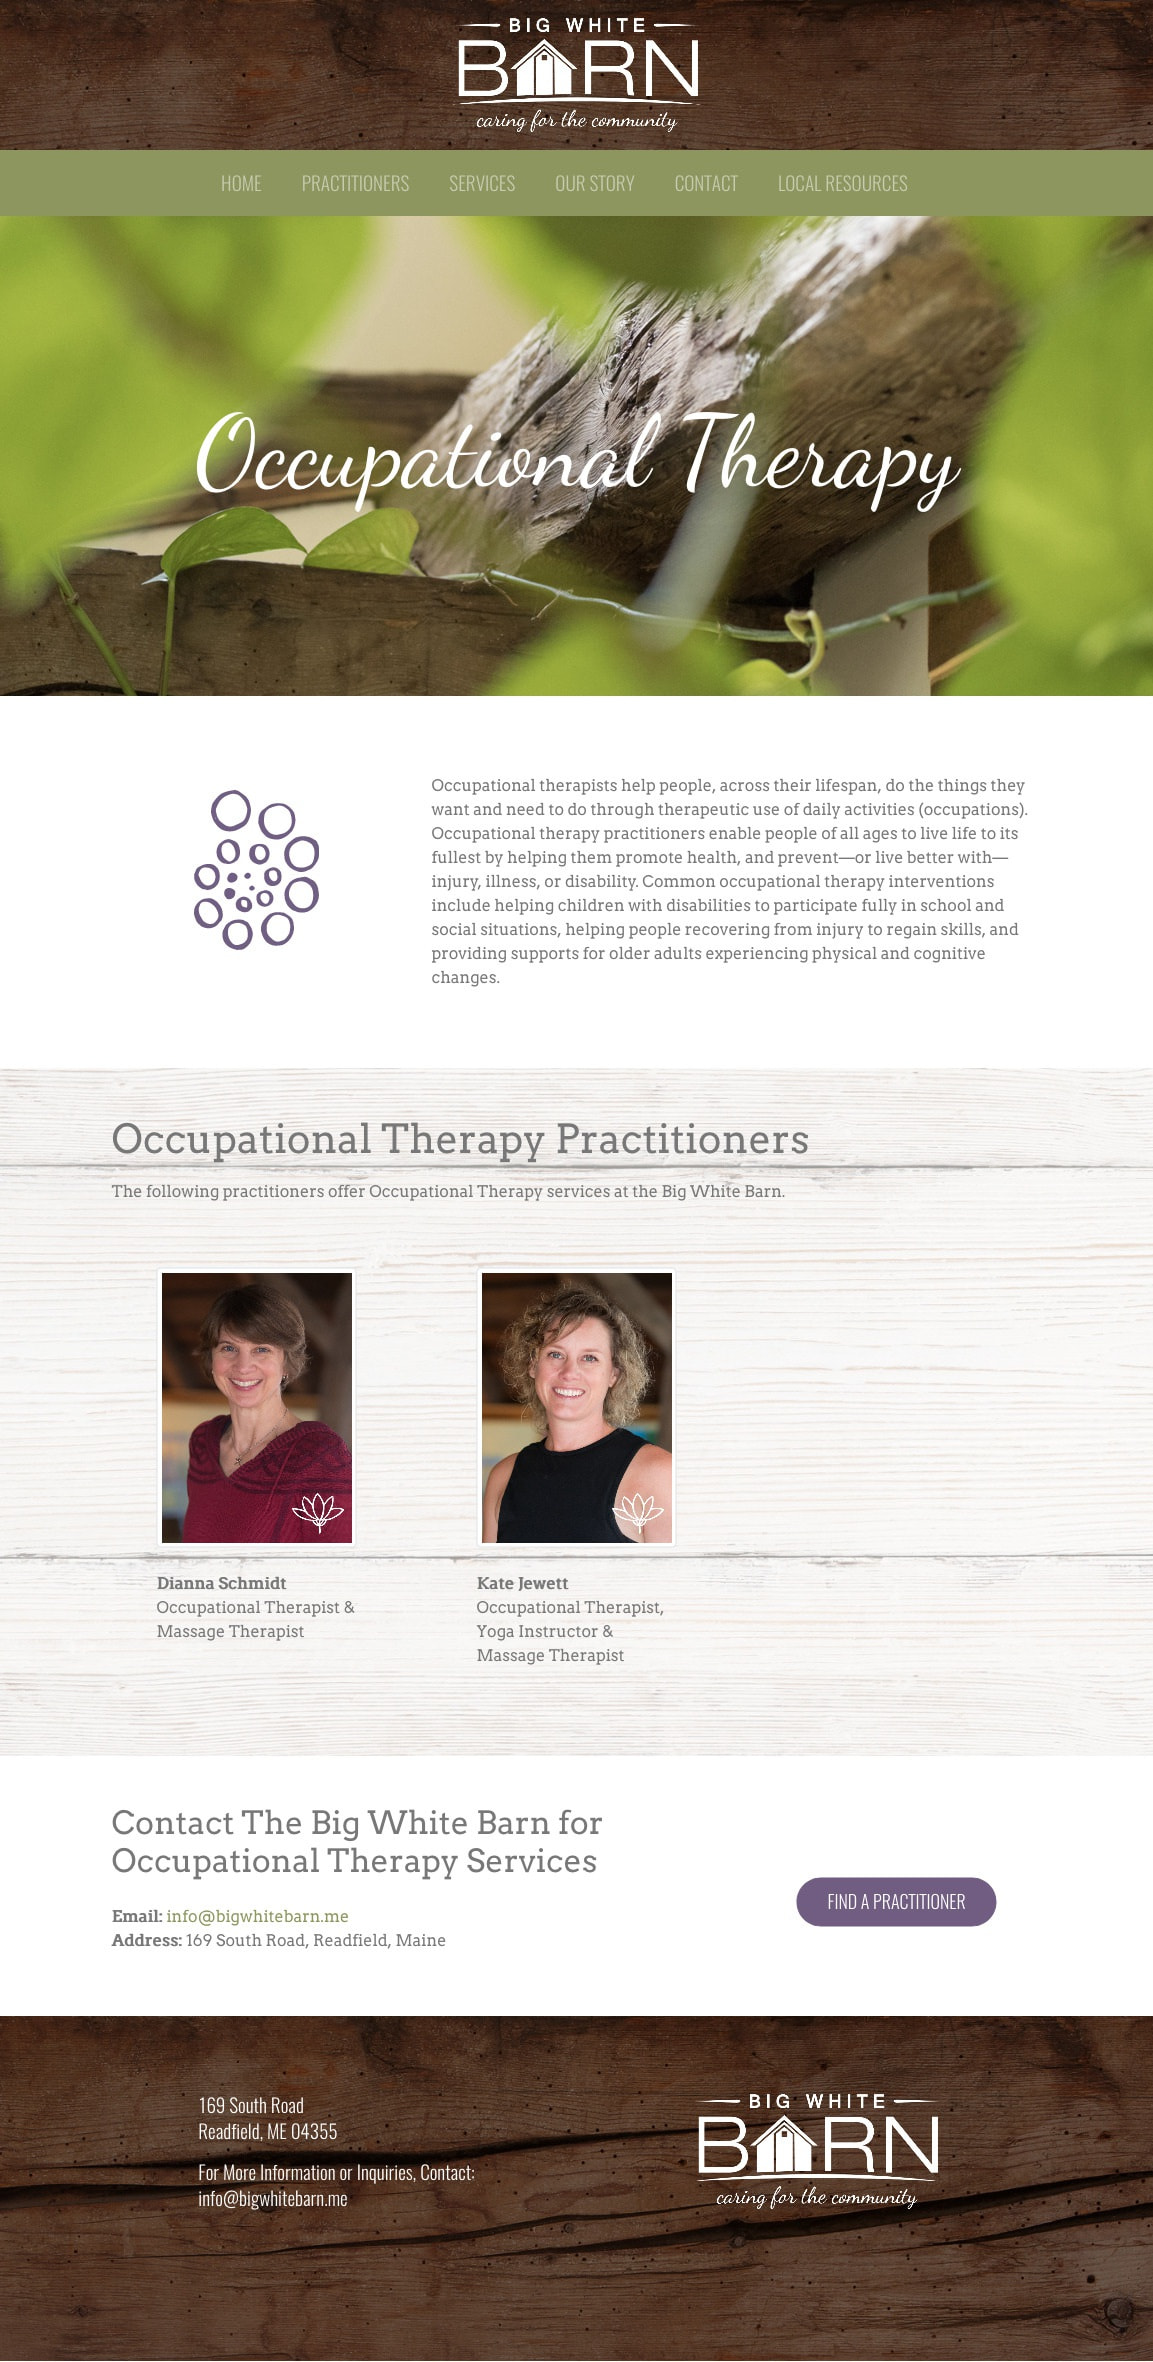 Big White Barn Occupational Therapy